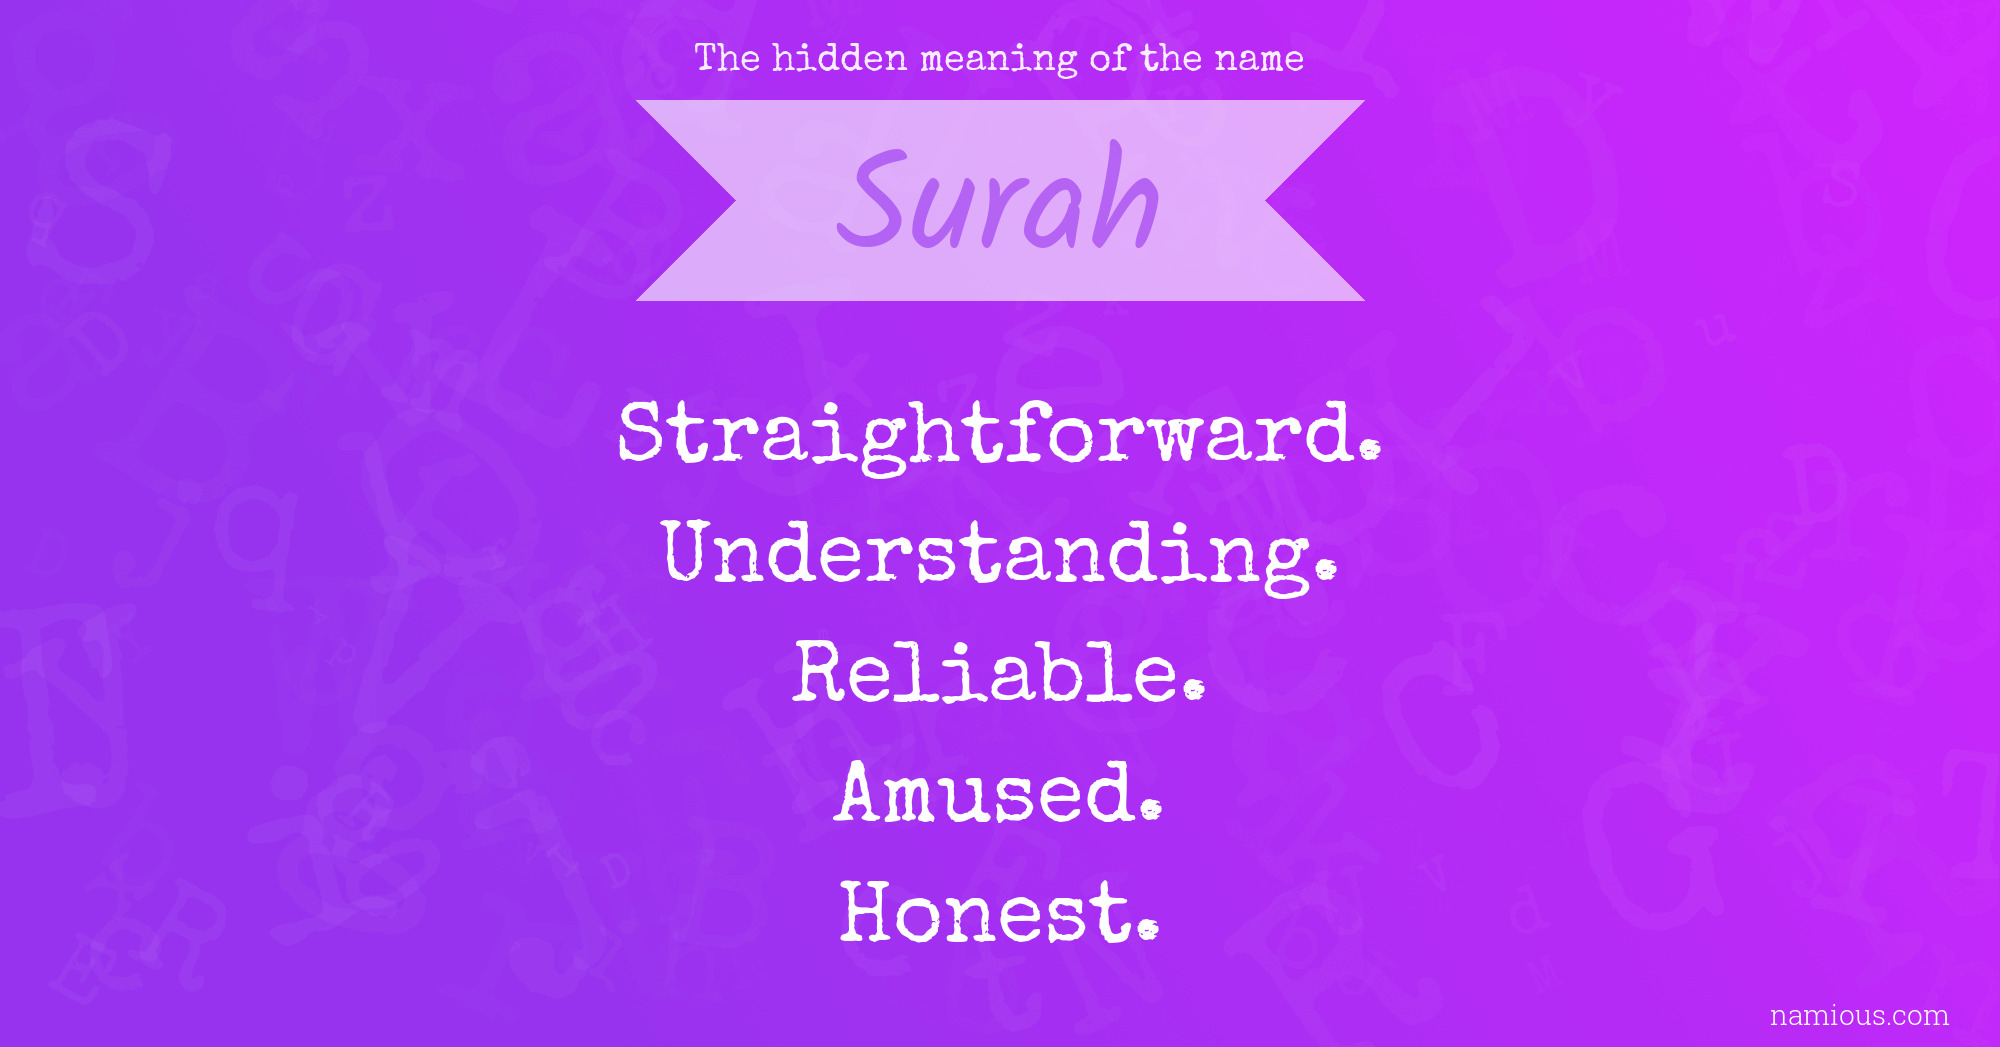 The hidden meaning of the name Surah